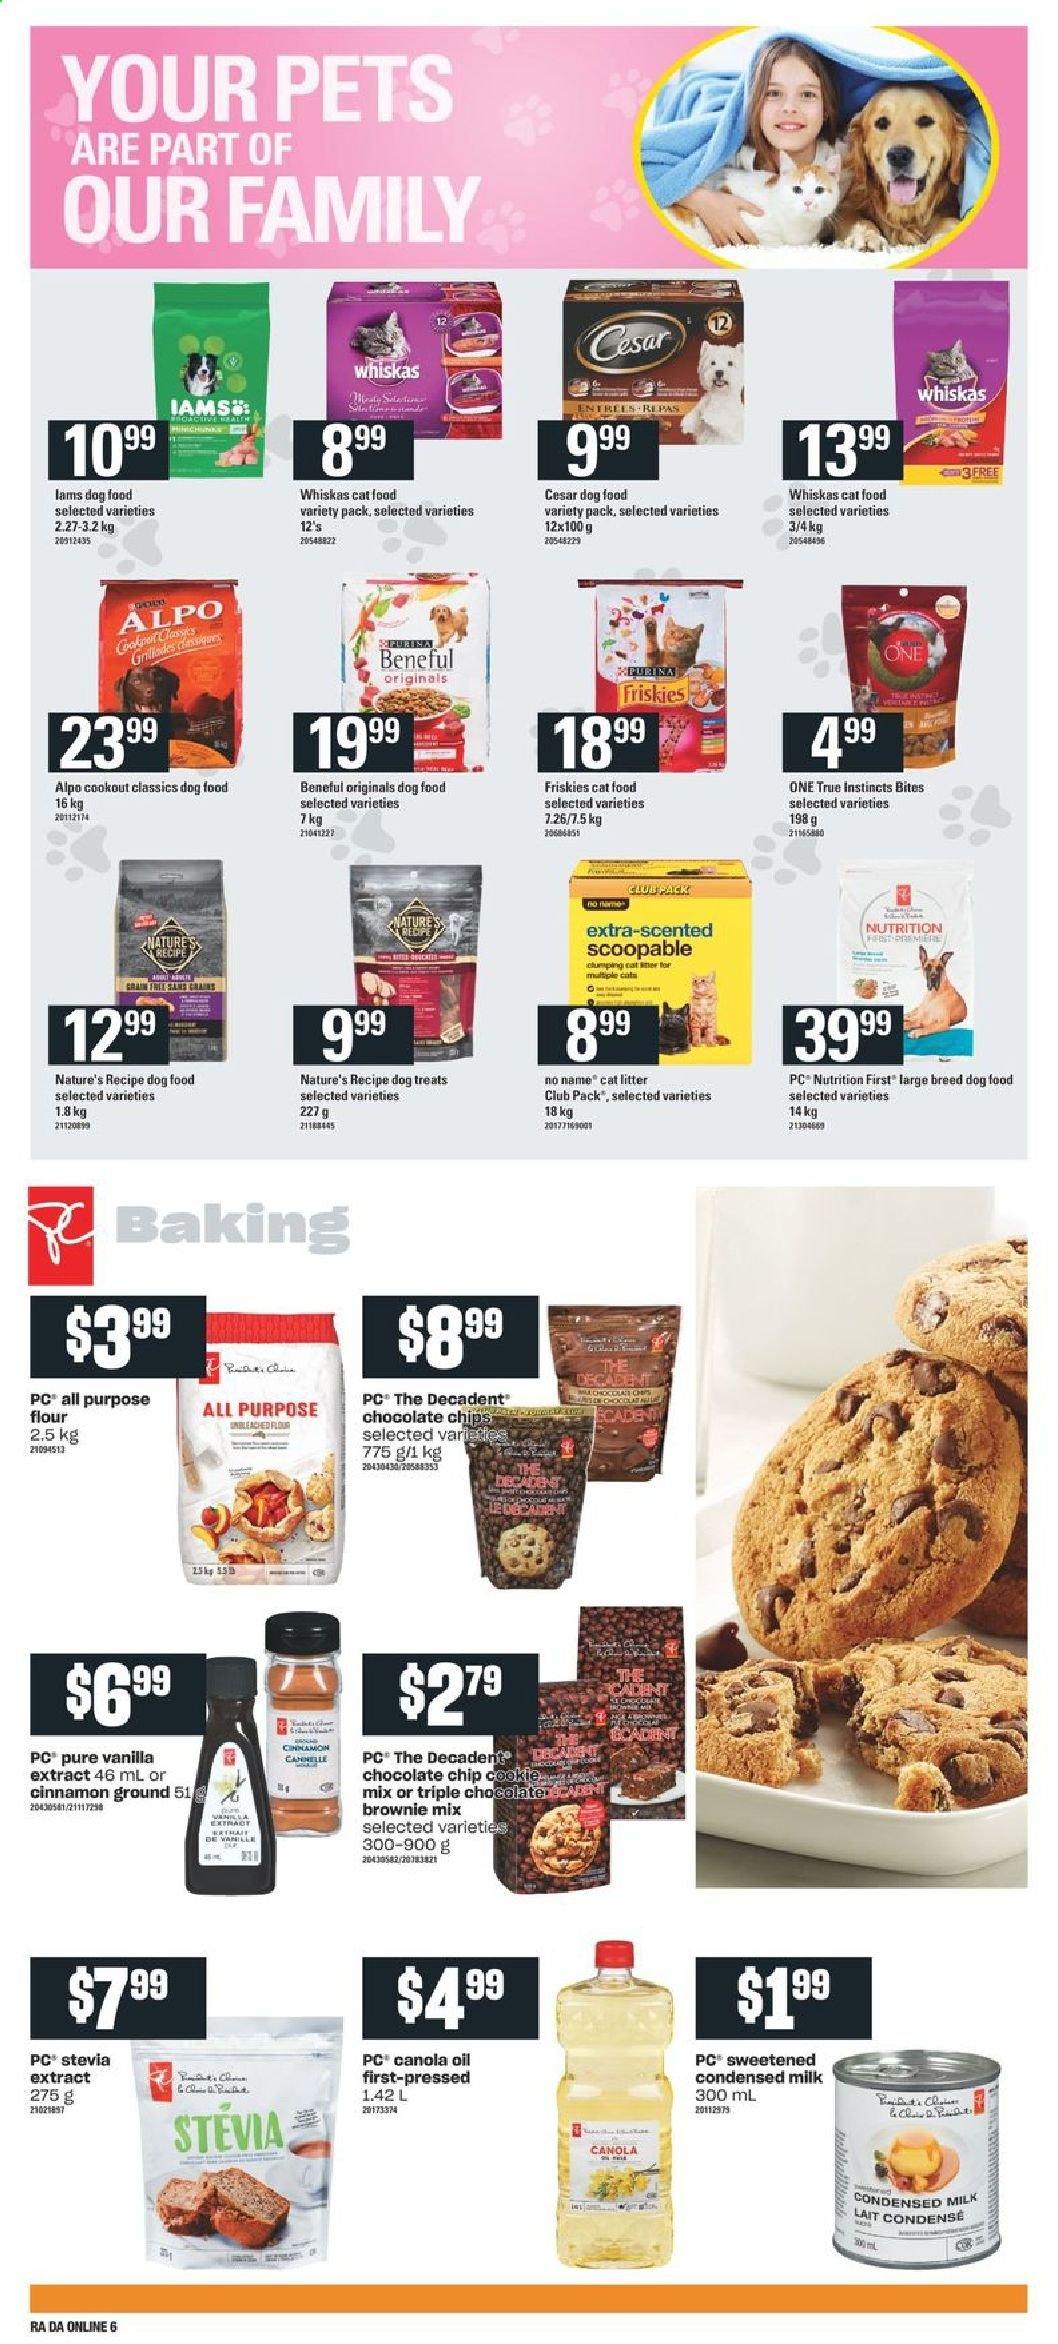 Atlantic Superstore flyer  - March 18, 2021 - March 24, 2021. Page 12.